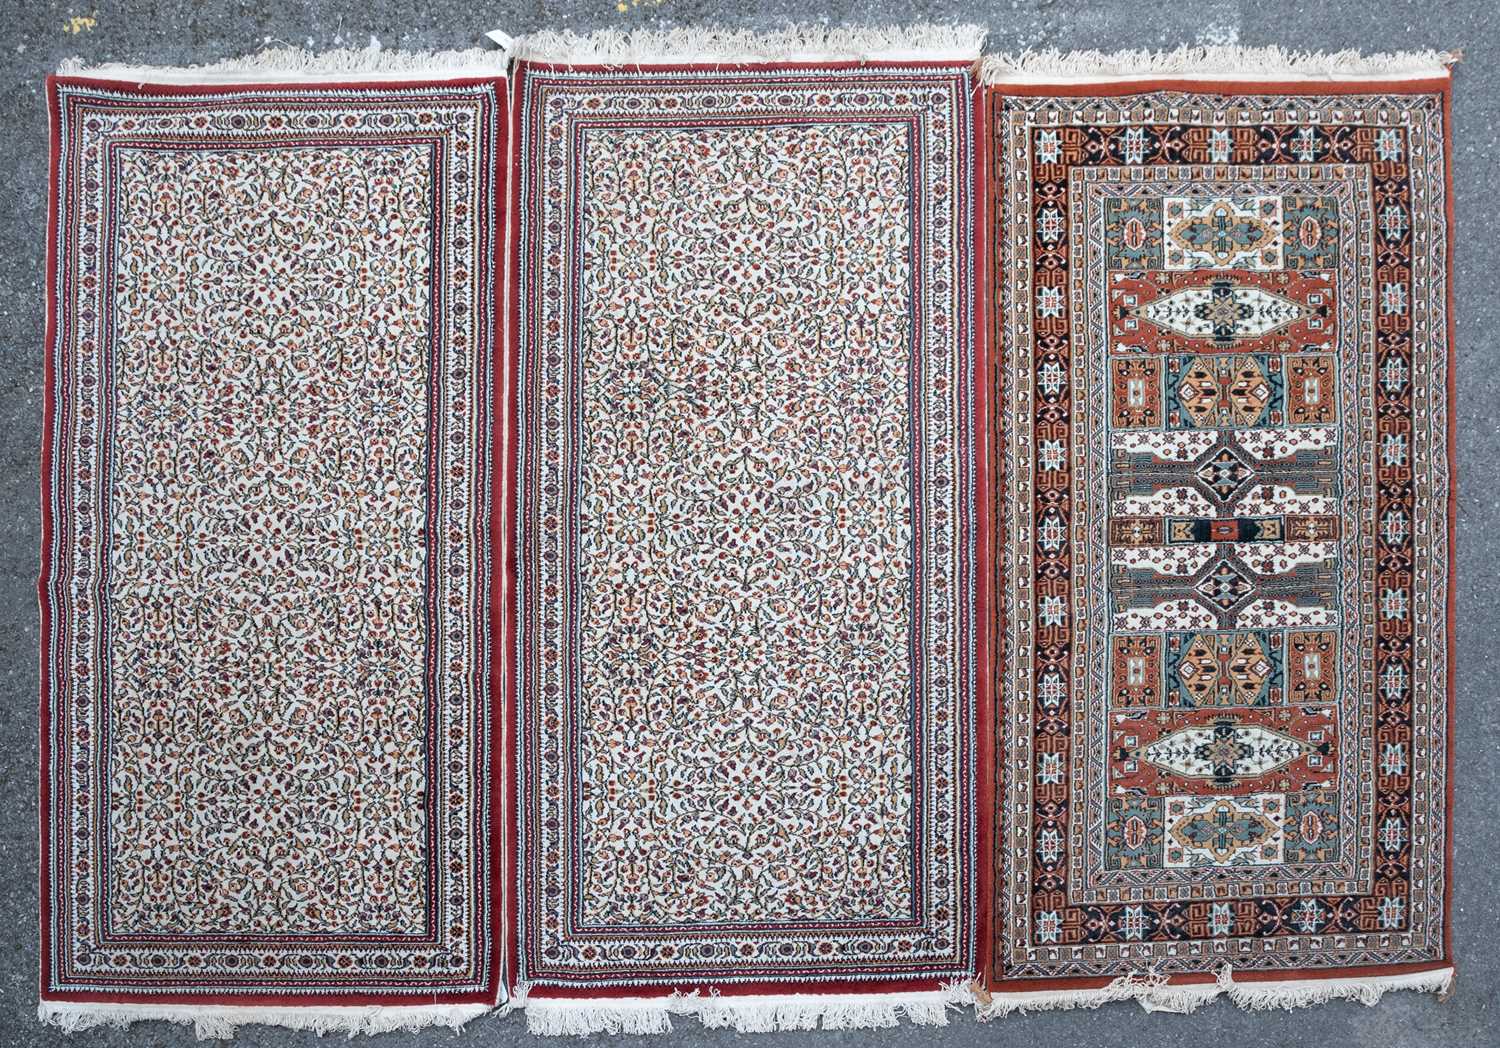 Three decorative machine made rugs all 99cm x 200cmModerate to good condition, with some minor wear